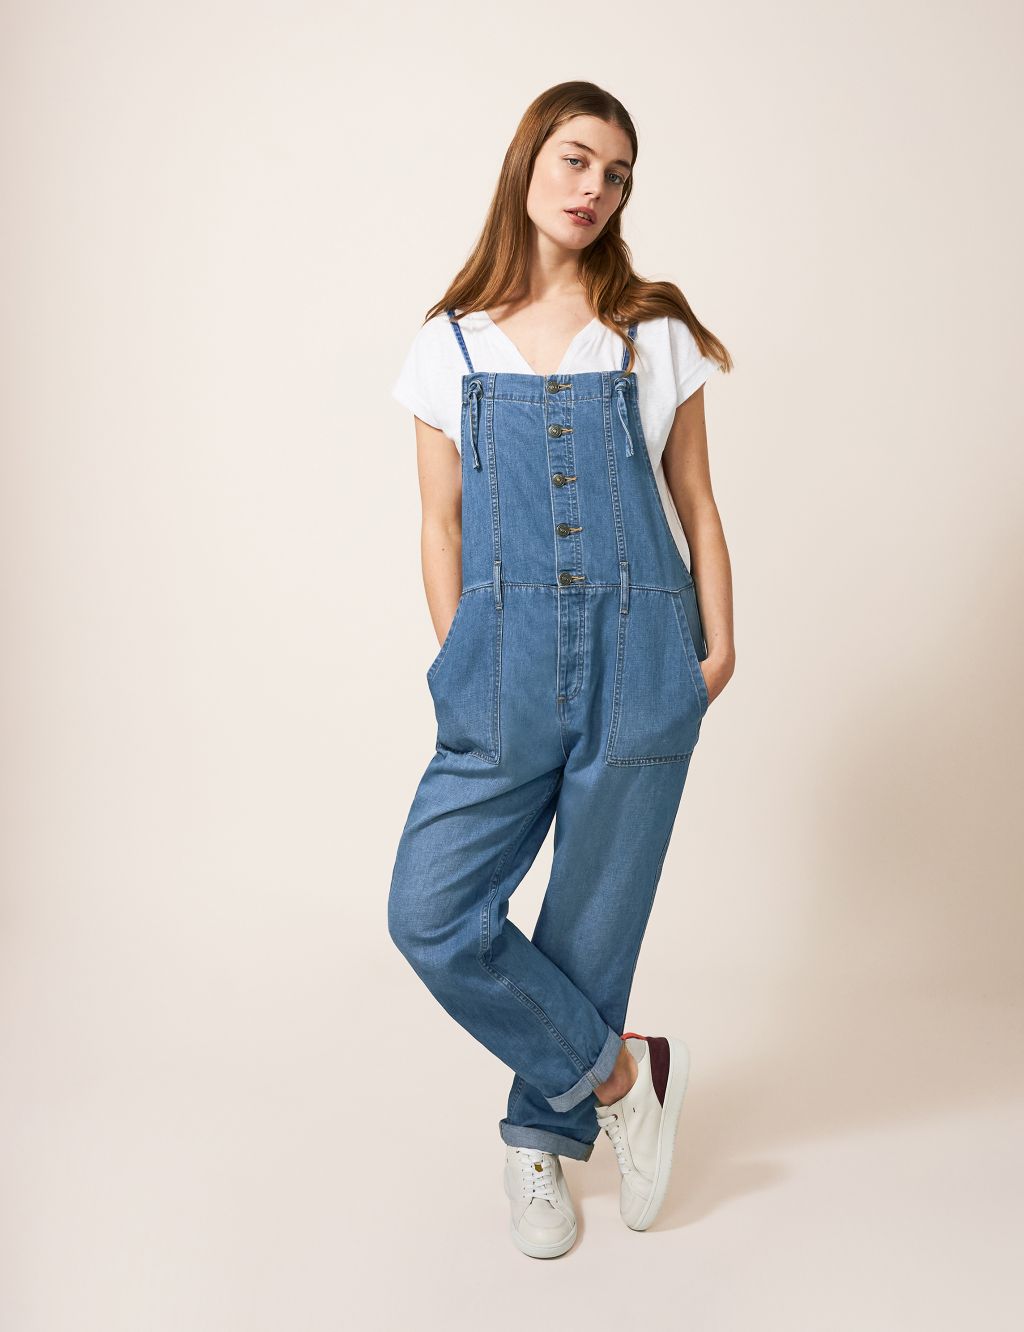 Plus-Size Dungarees | M&S